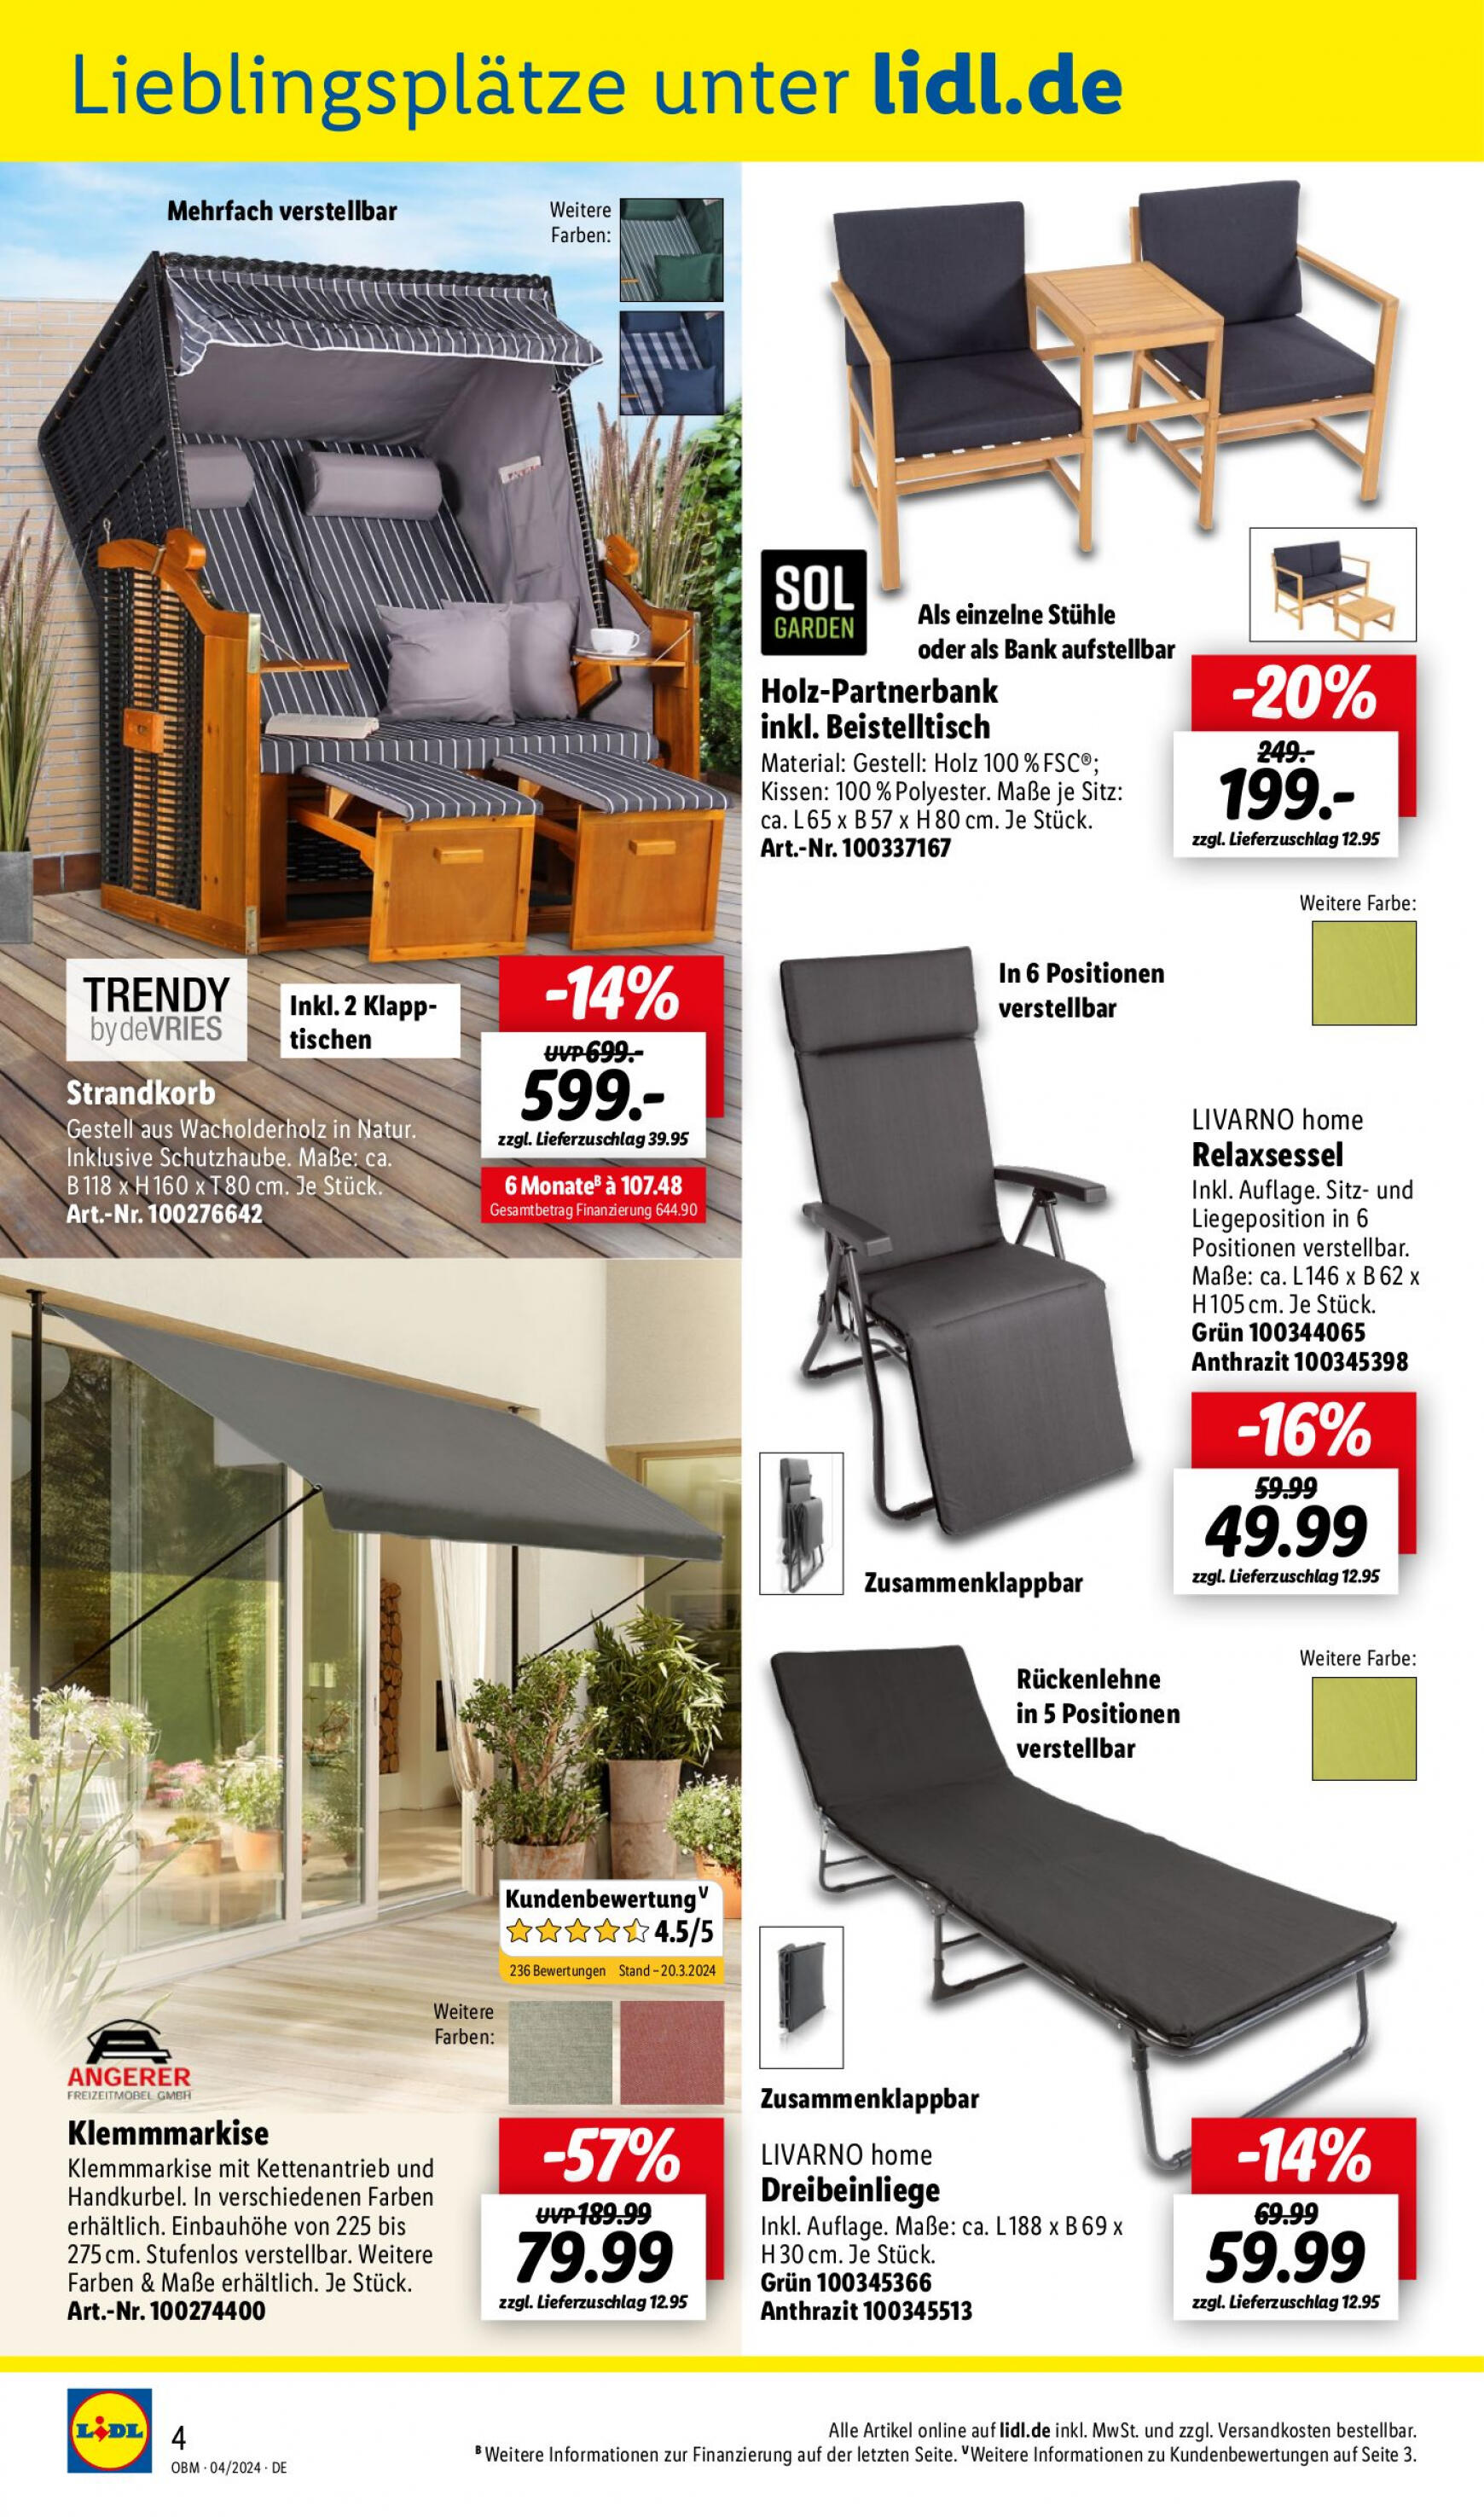 lidl - Flyer Lidl - Aktuelle Onlineshop-Highlights aktuell 01.04. - 30.04. - page: 4